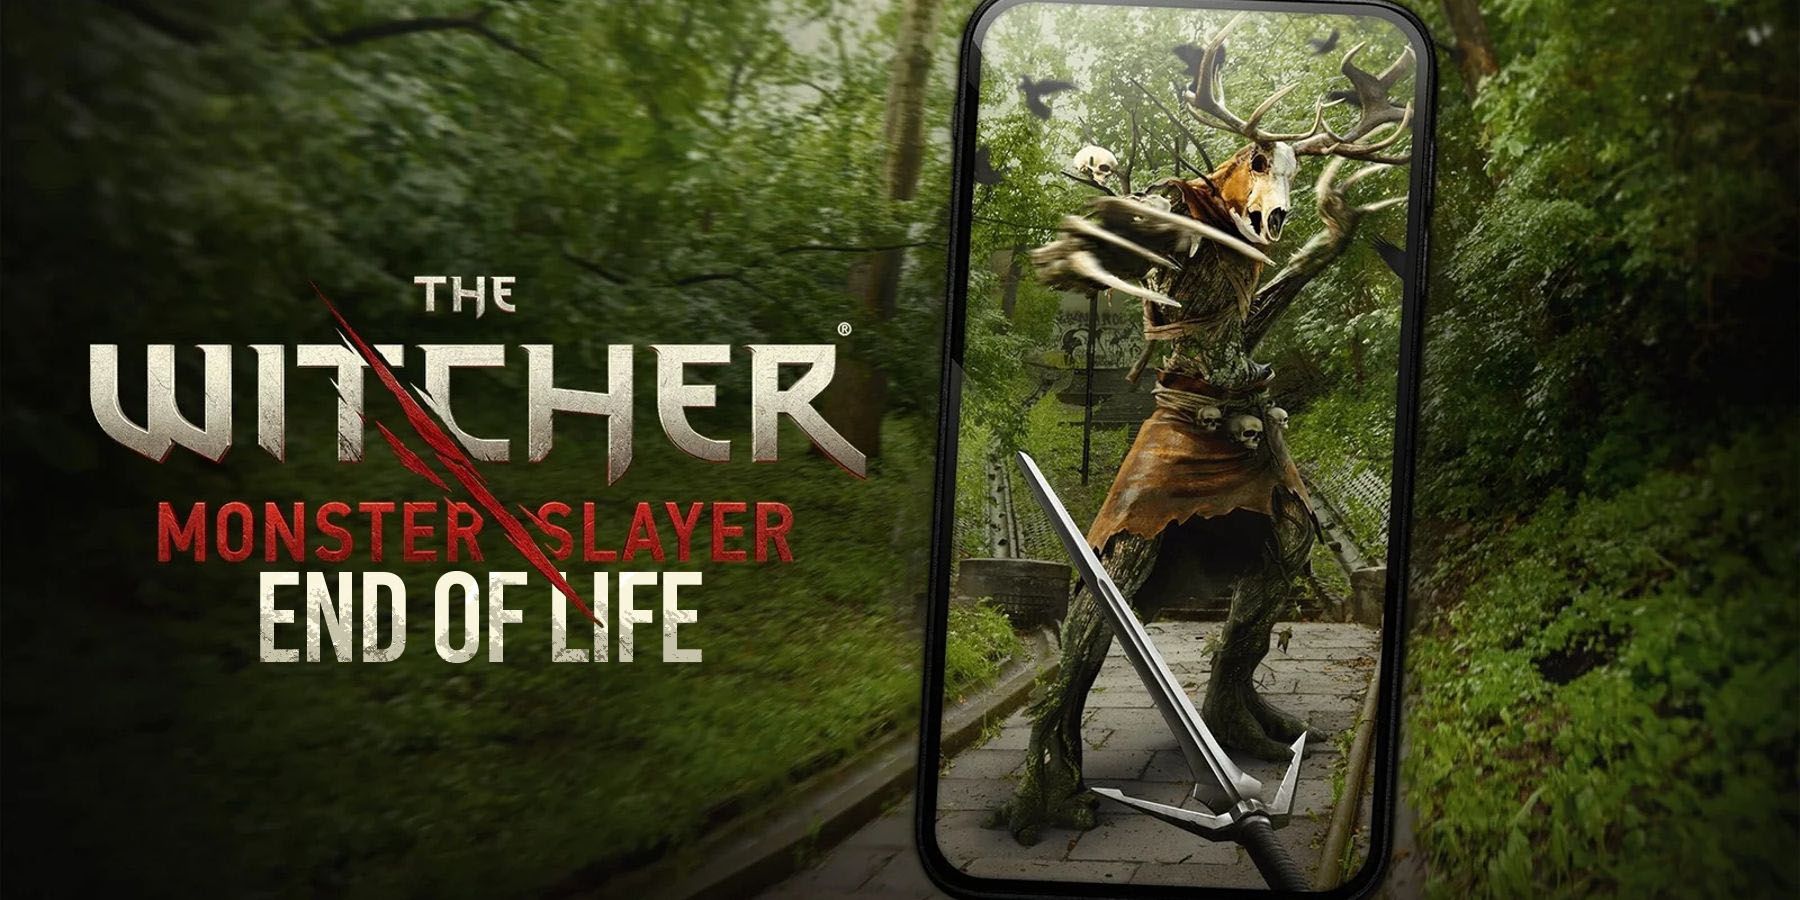 The Witcher Monster Slayer End of Life leshen cover art composite